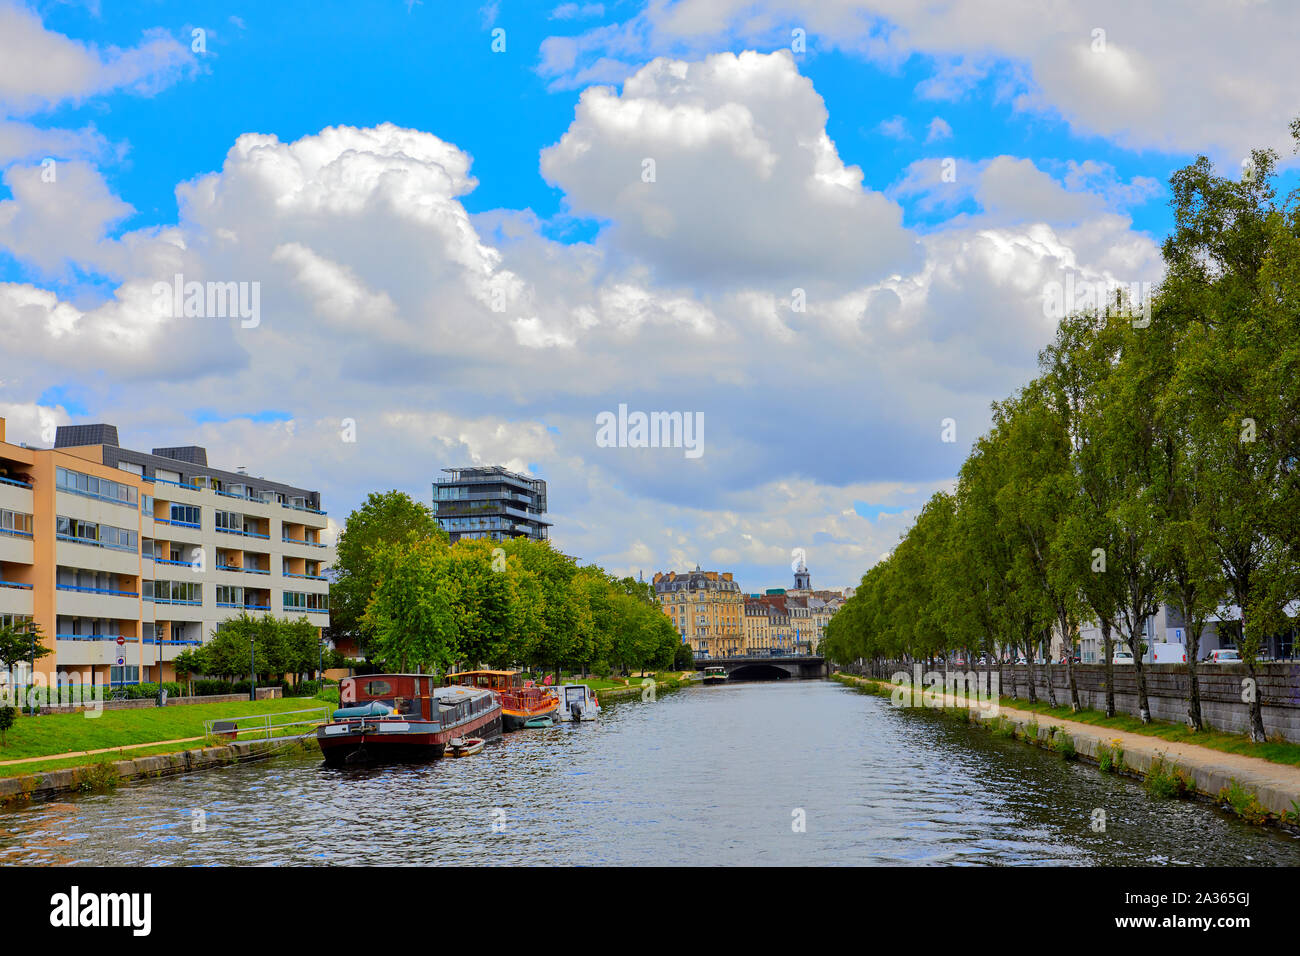 Image of Rennes from the River Vilaine, Brittany, France Stock Photo